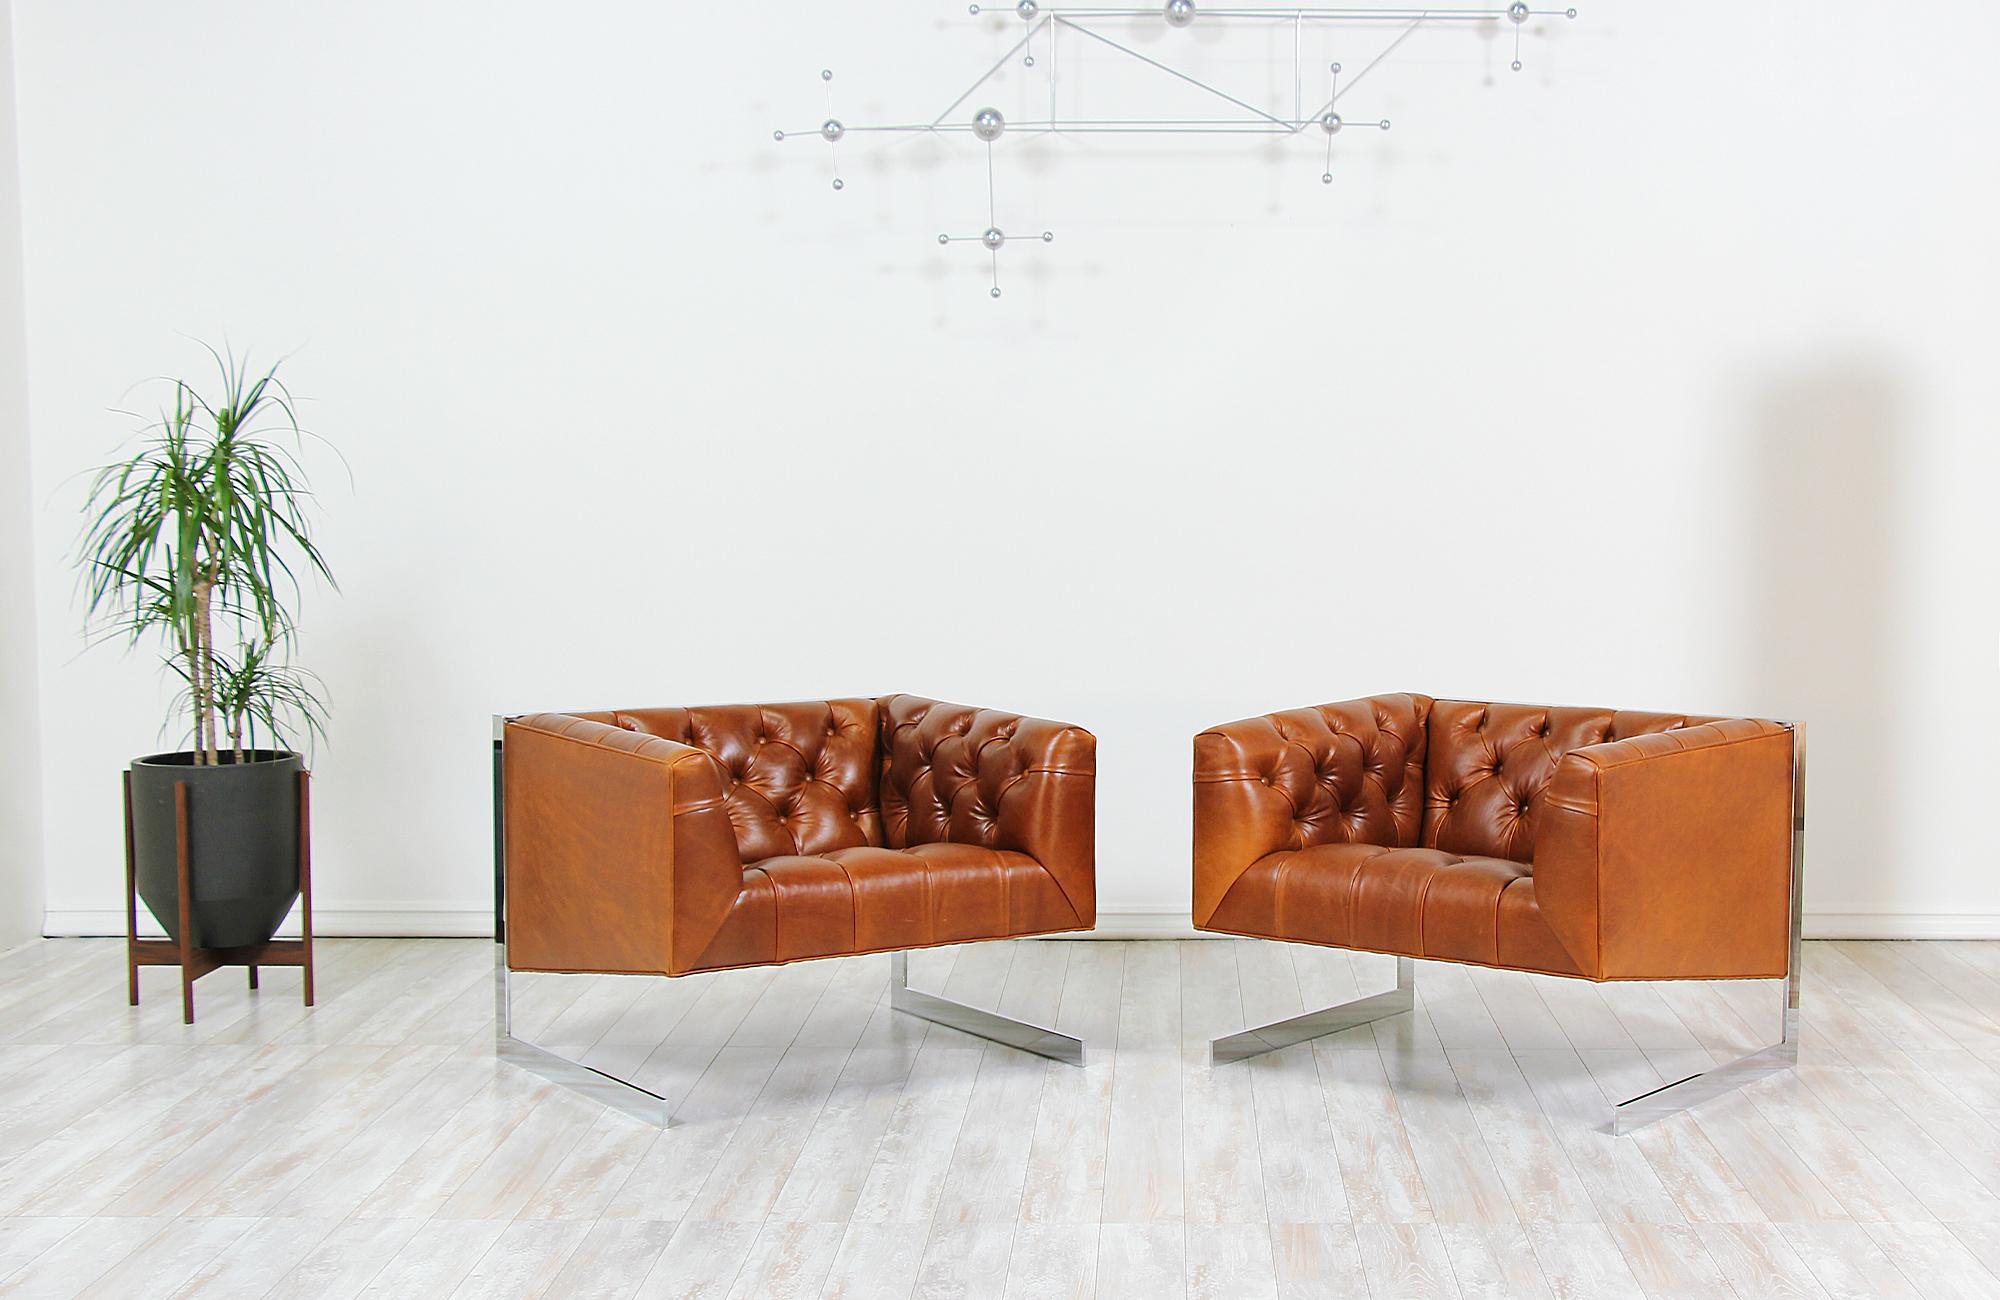 Pair of stylish lounge chairs designed by Milo Baughman for Thayer Coggin in the United States, circa 1960s. This pair of lounge chairs feature an L-shaped cantilevered steel base supporting the architectural cubed seat rest that has been newly